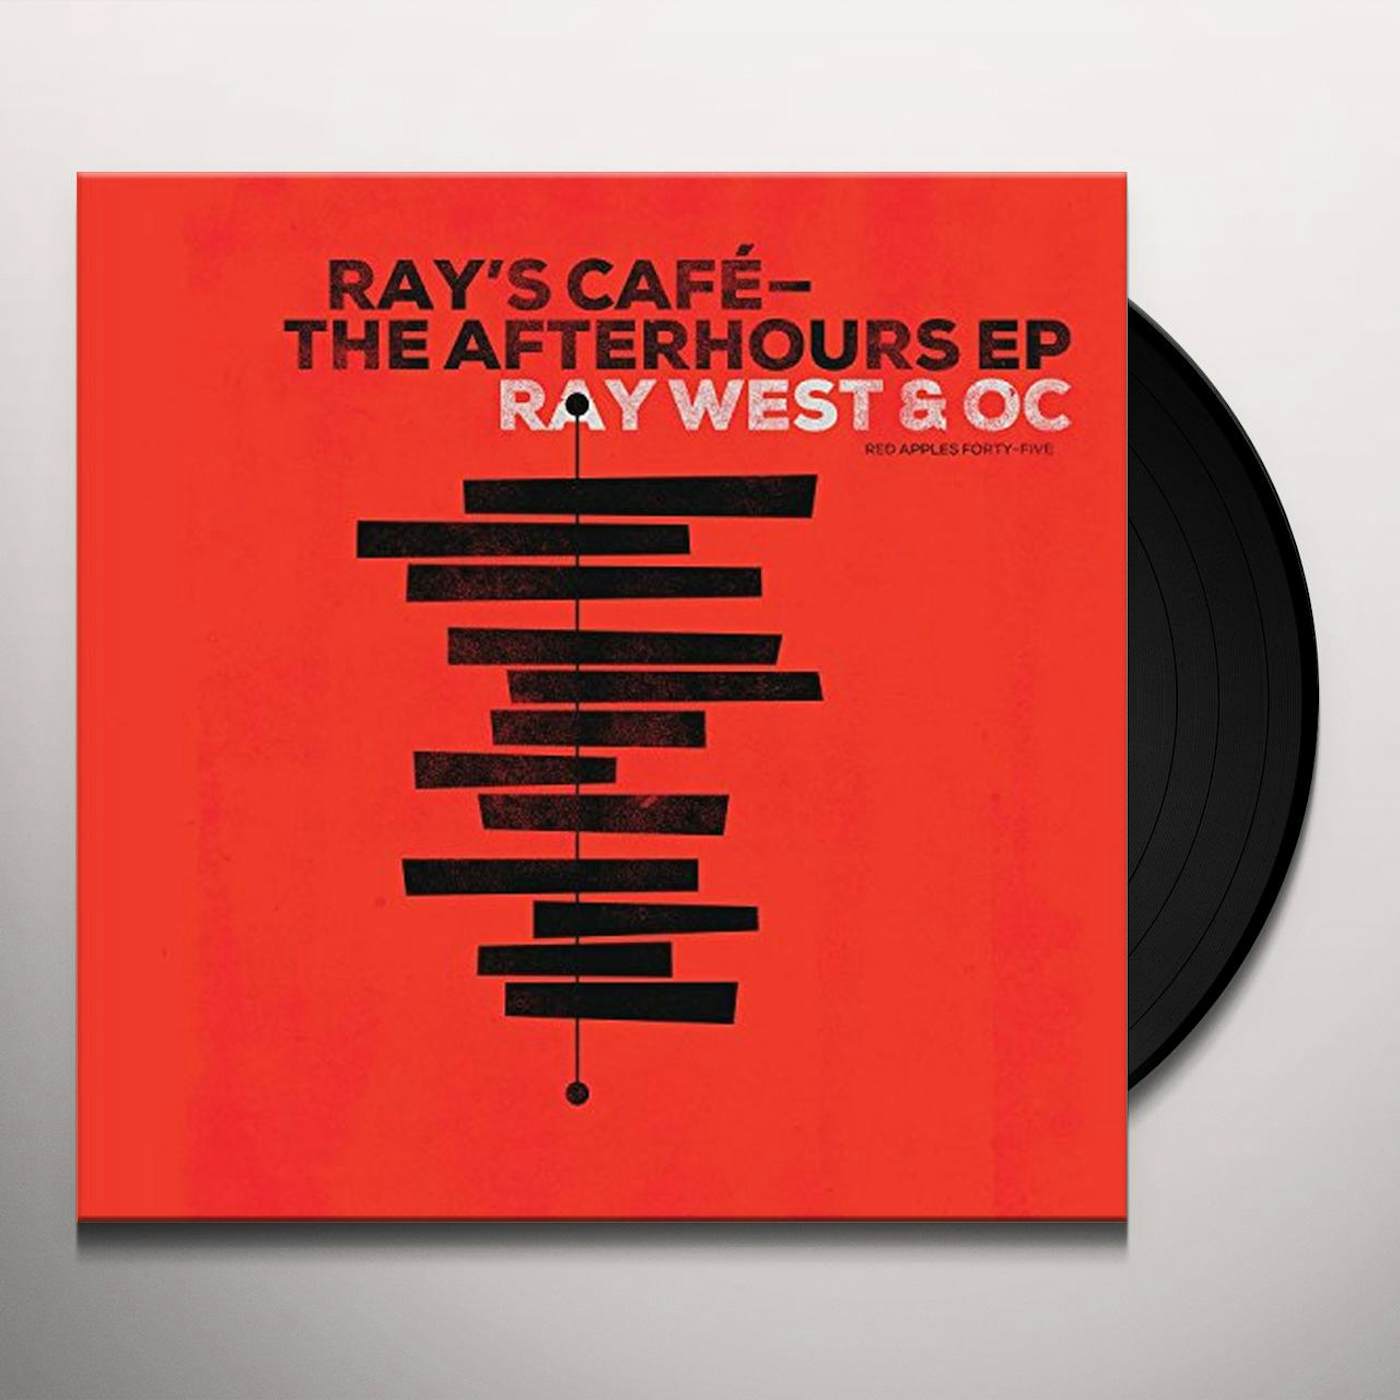 Ray West & Oc RAY'S CAFE: AFTER HOURS Vinyl Record